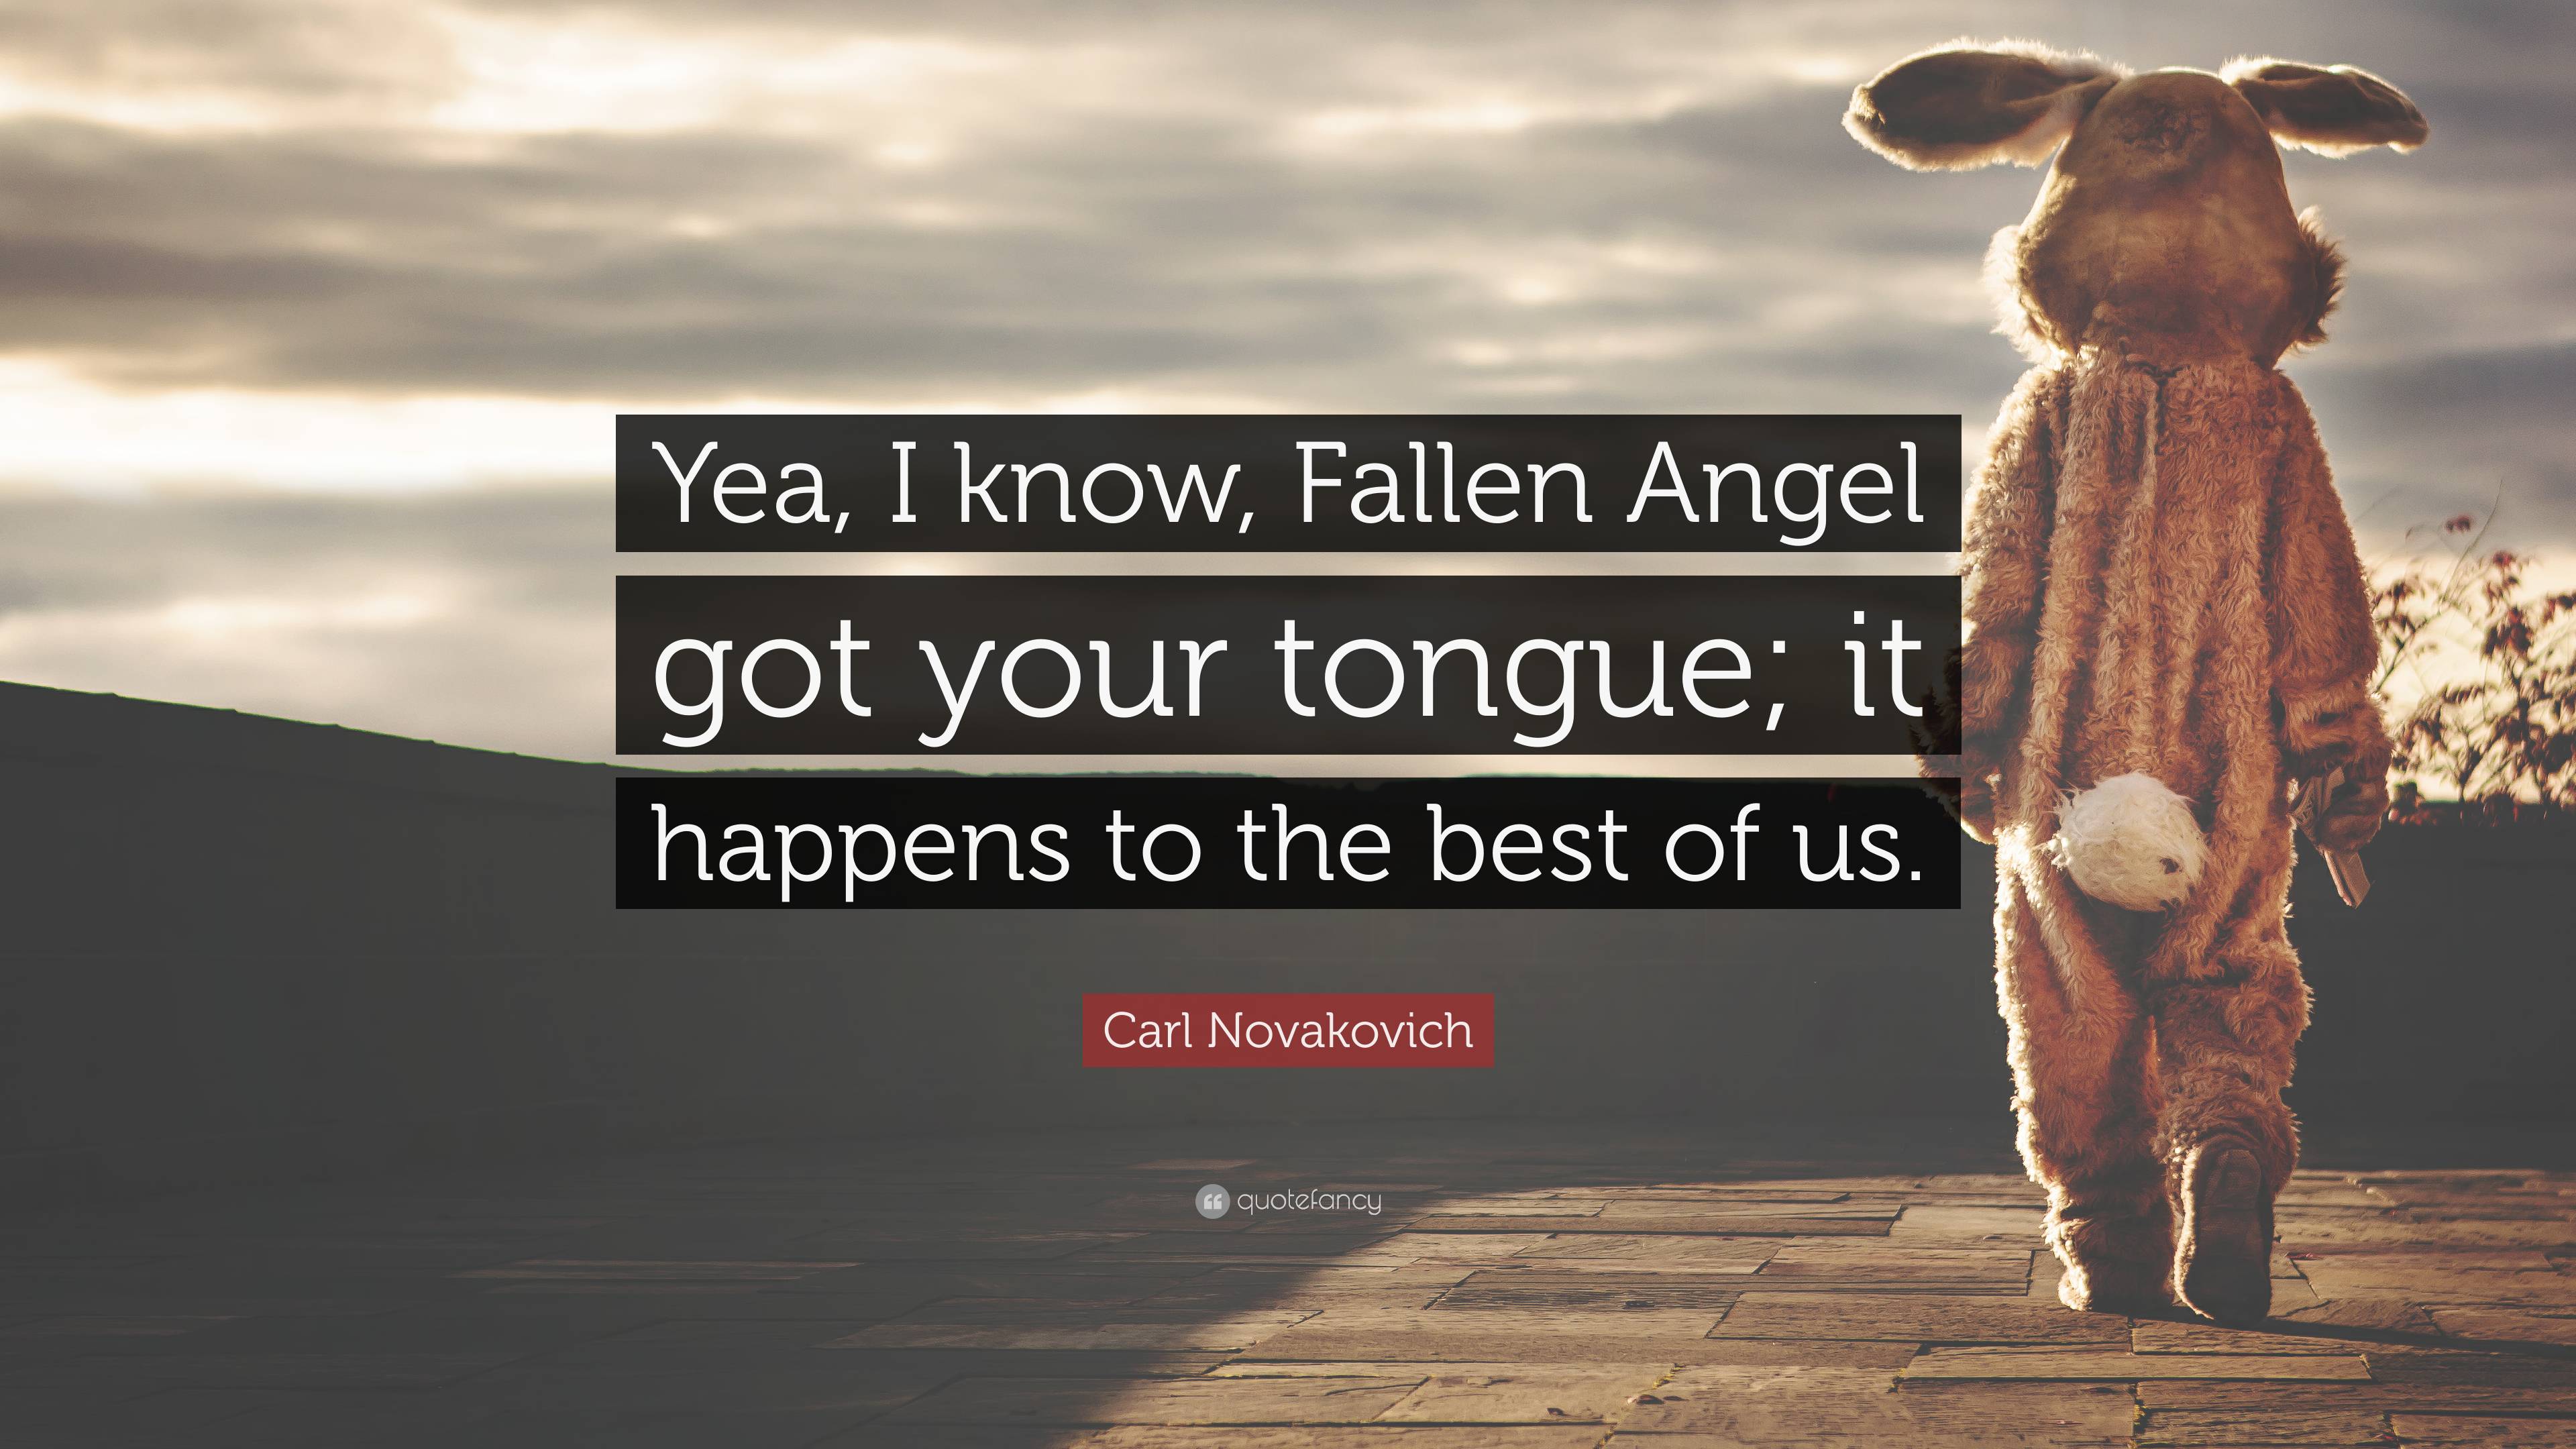 Carl Novakovich Quote: “Yea, I know, Fallen Angel got your tongue; it happens  to the best